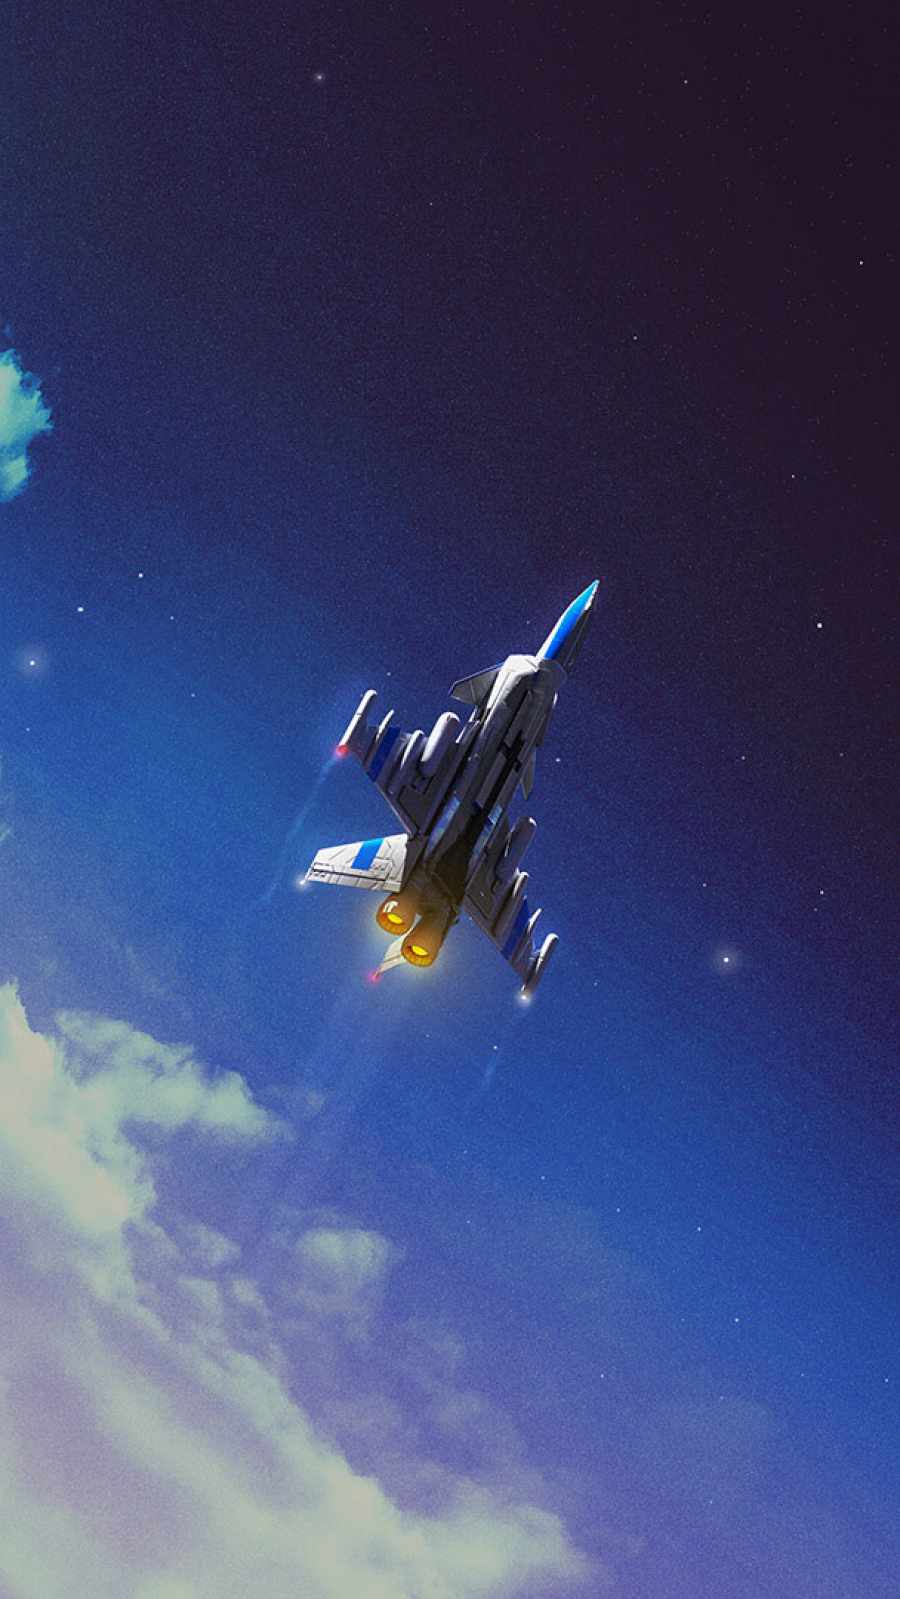 Fighter Jet Going To Space IPhone Wallpaper Wallpaper, iPhone Wallpaper